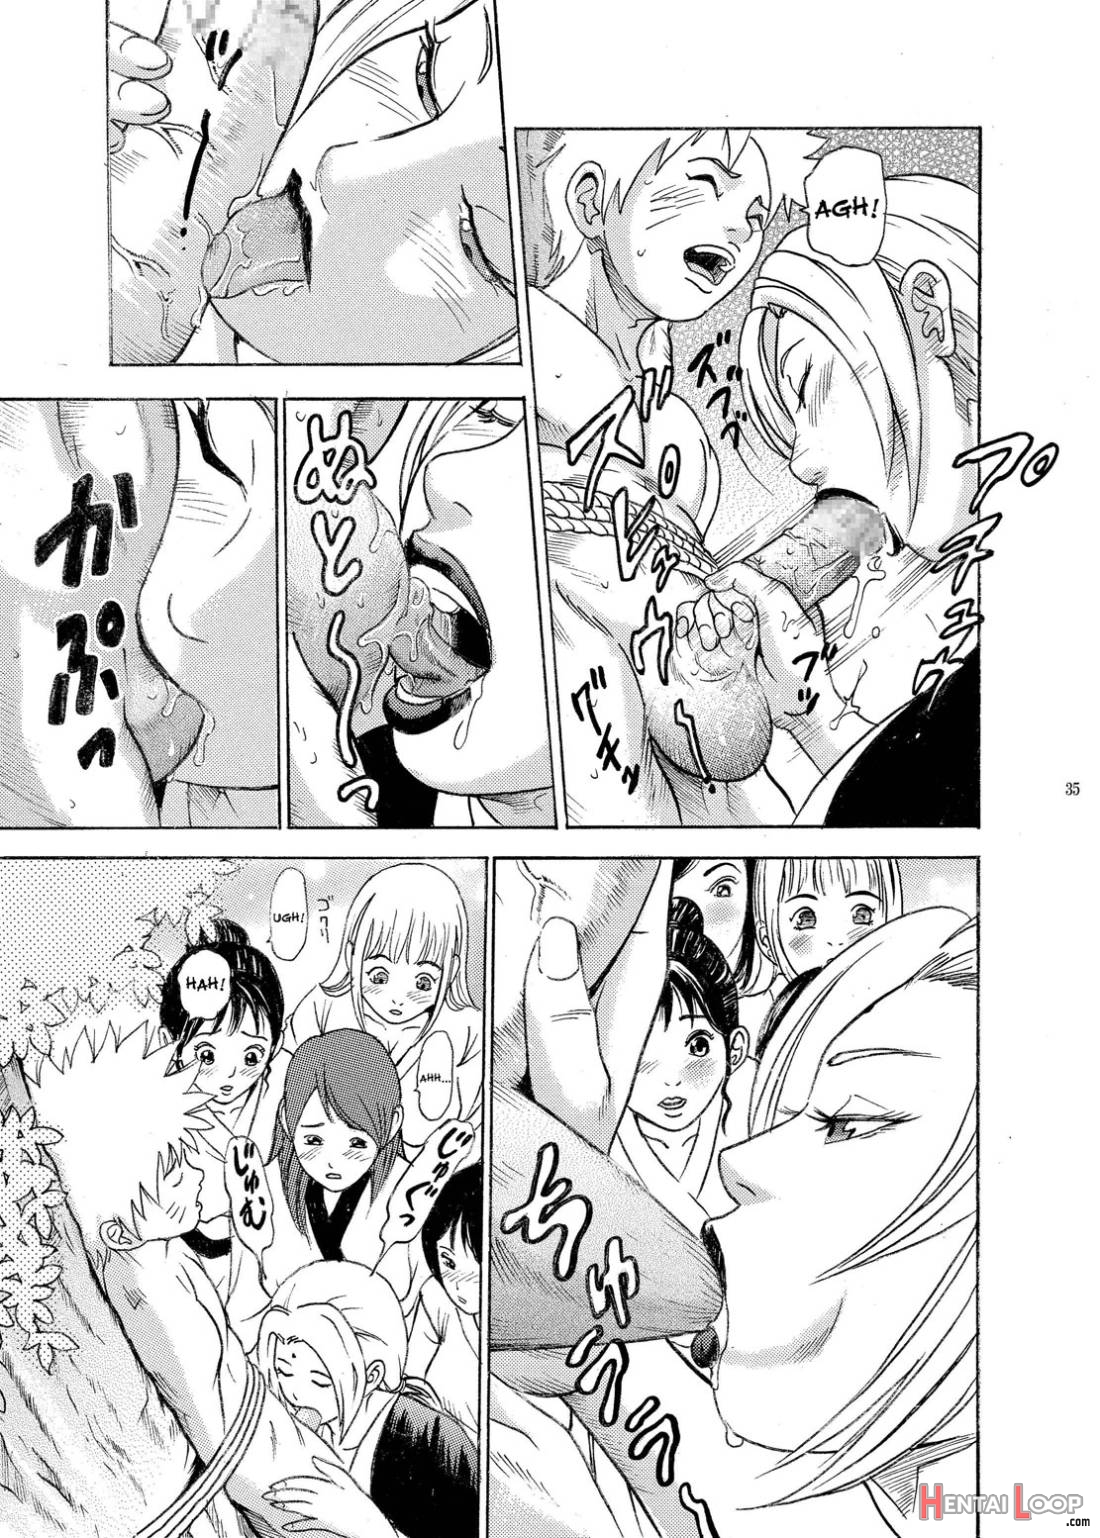 ParM SpeciaL 1 In Nin Shiken page 32